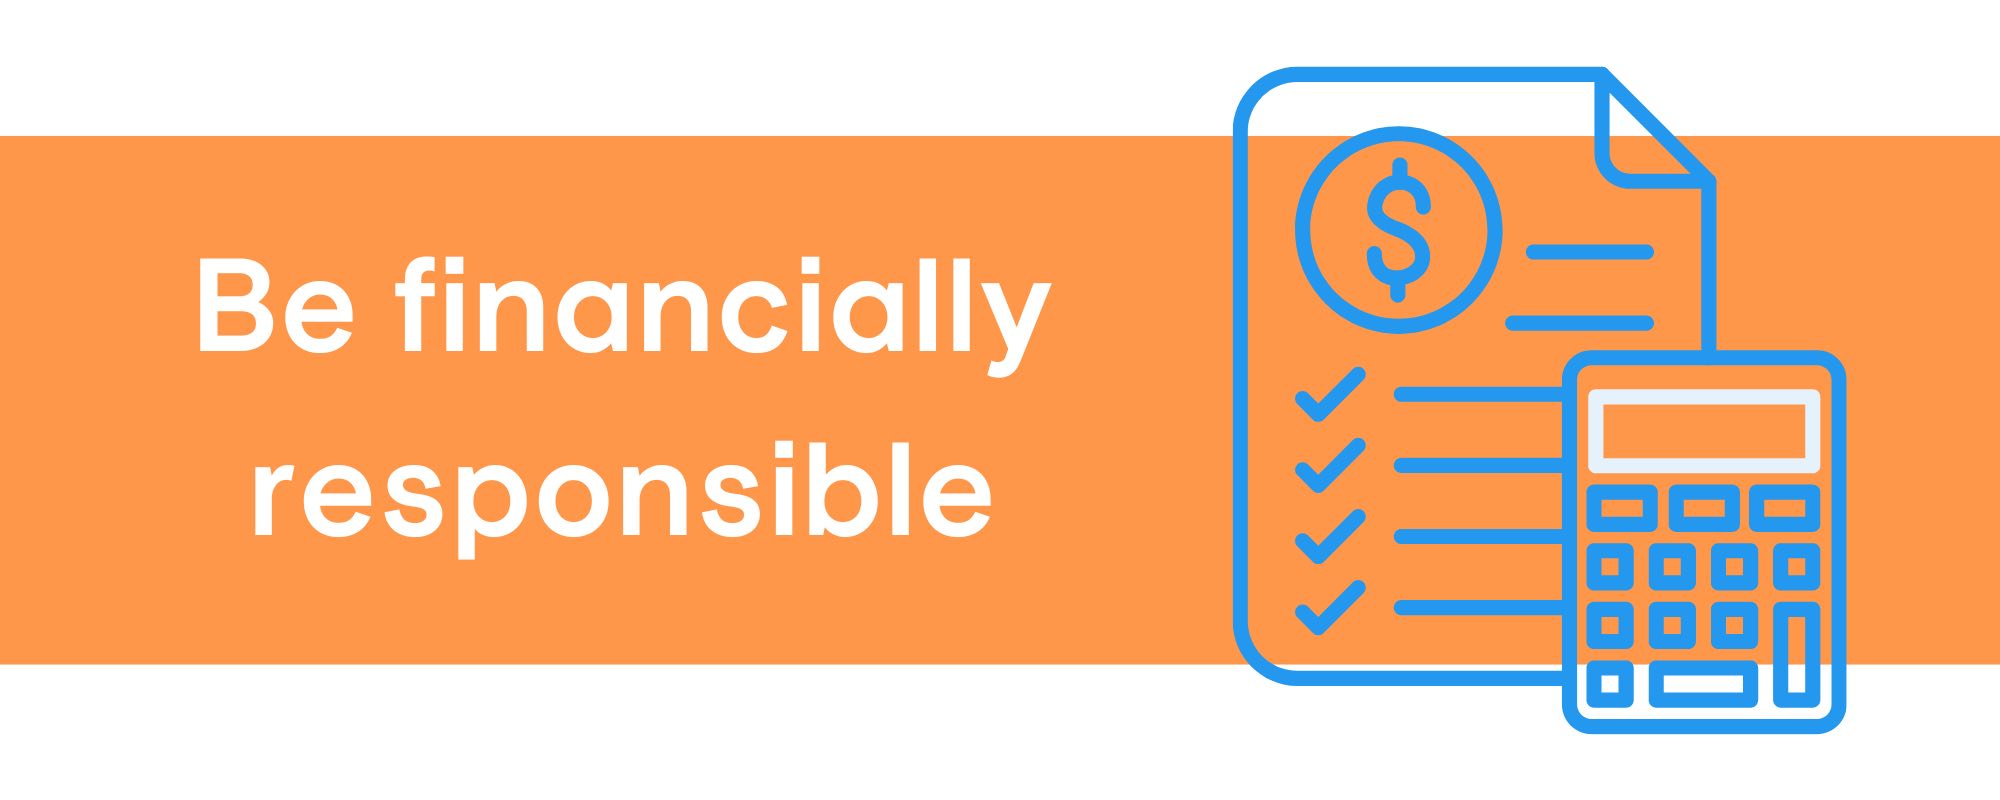 Your ministry must be fiscally responsible to survive